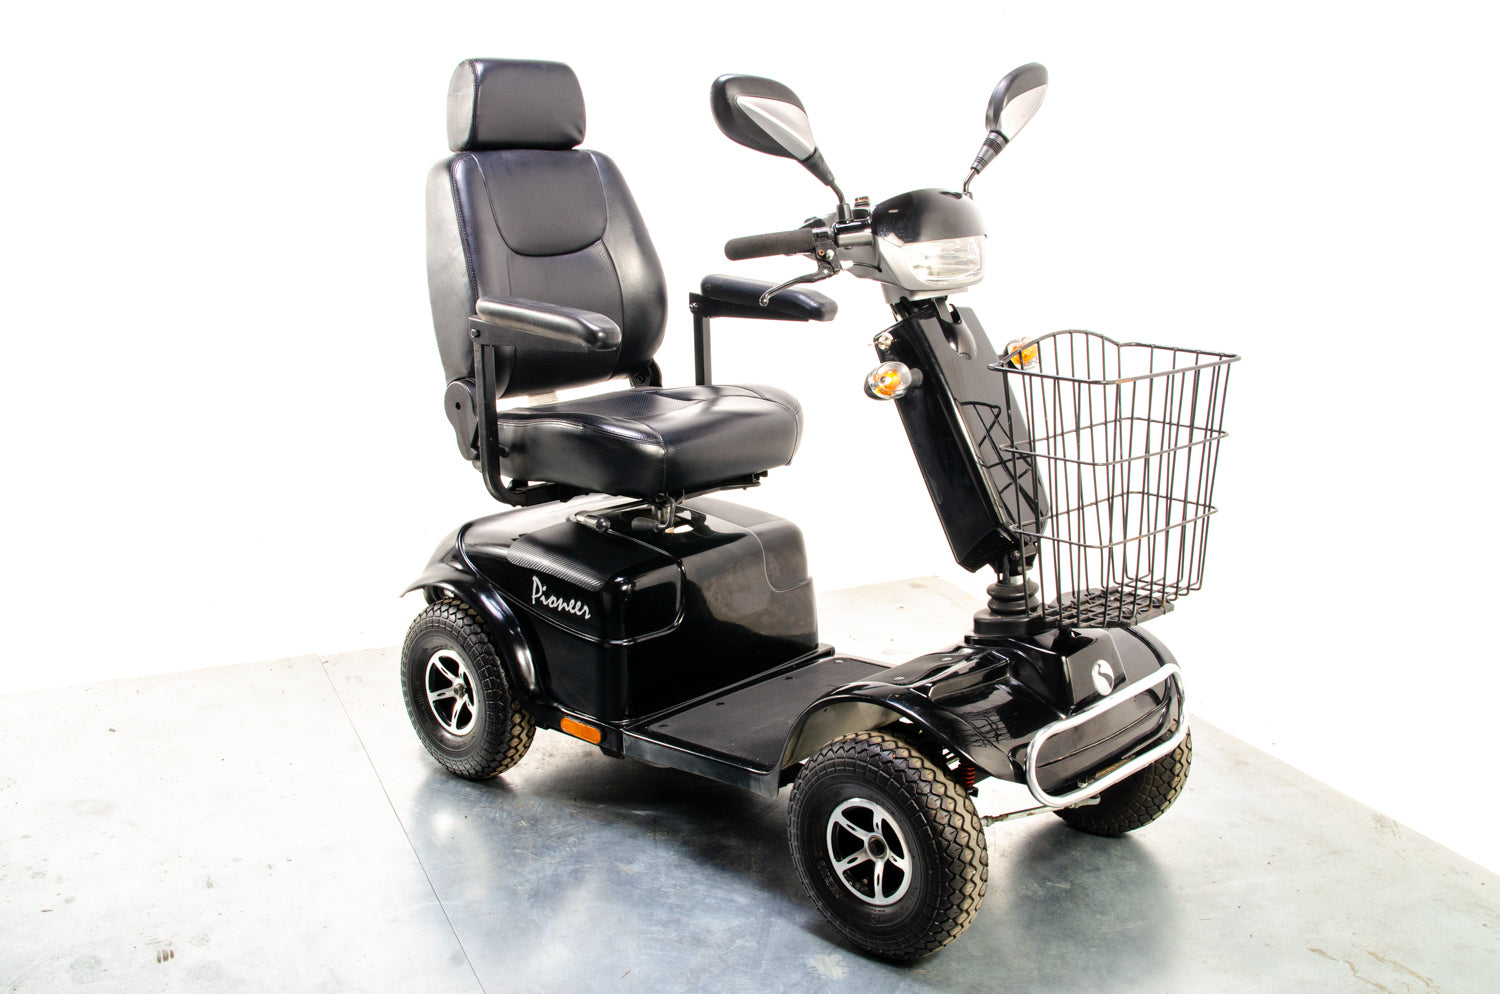 Rascal Pioneer Used Electric Mobility Scooter 8mph All-Terrain Suspension Off-Road Black 13360